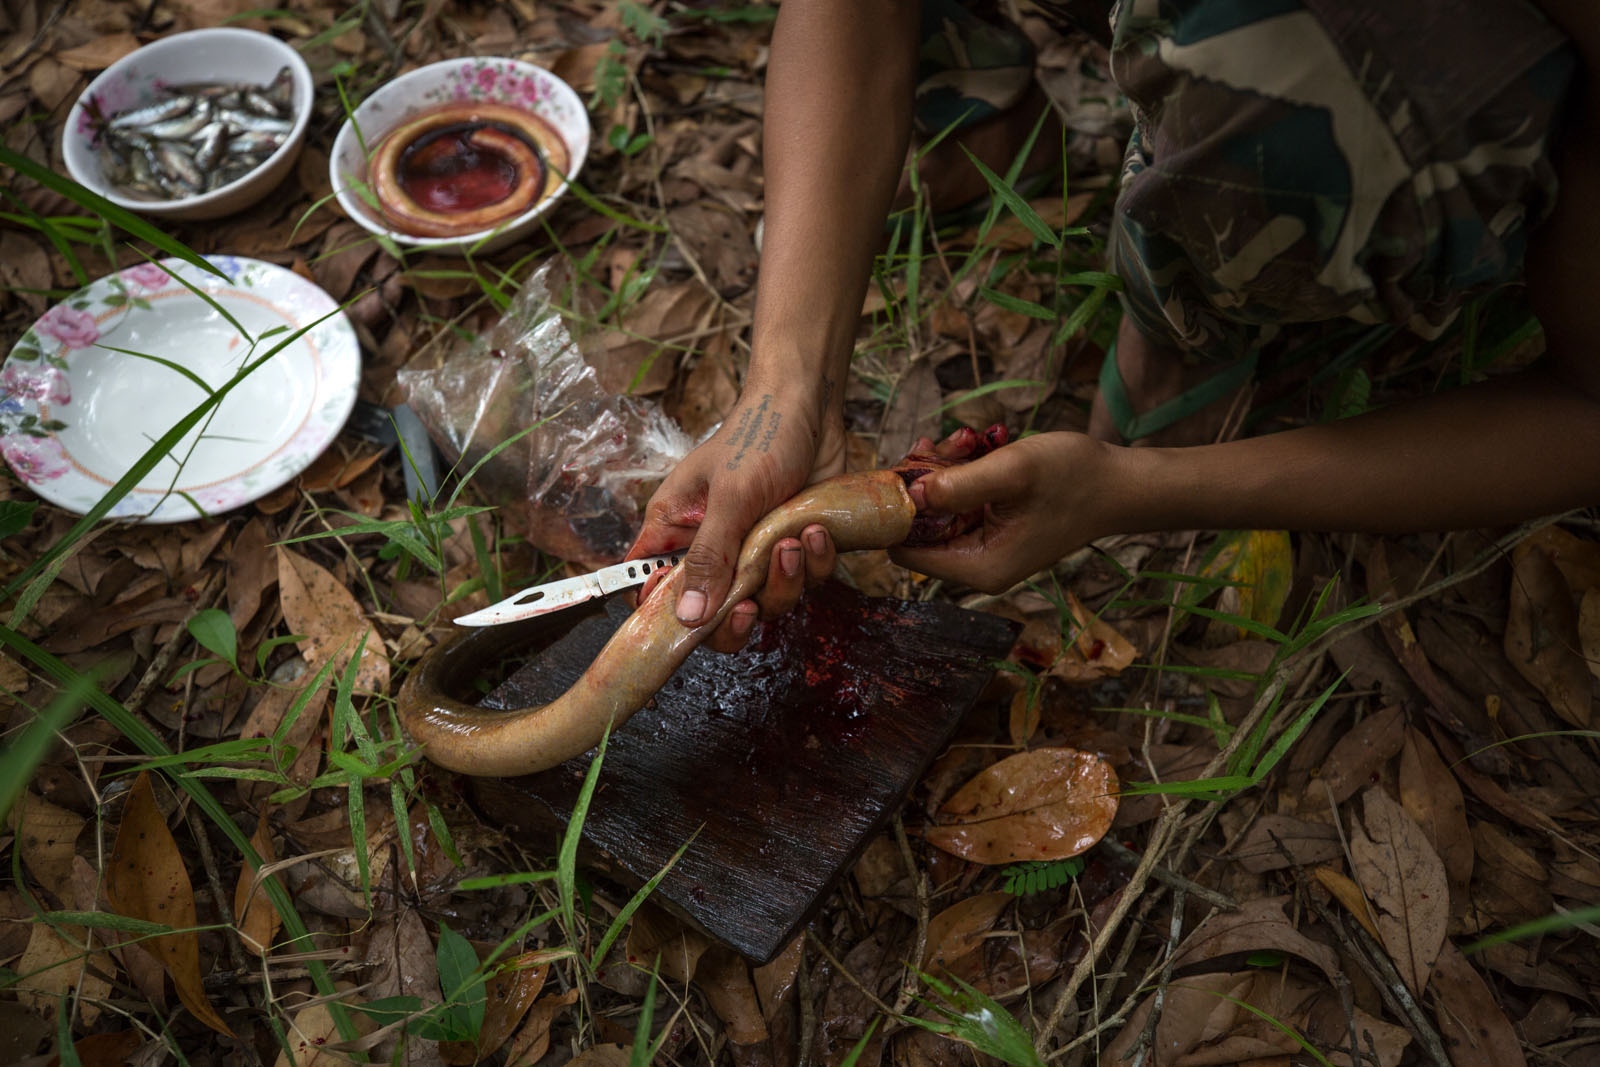 THAILAND'S FOREST RANGERS - A forest ranger guts an eel caught by the rangers in a...